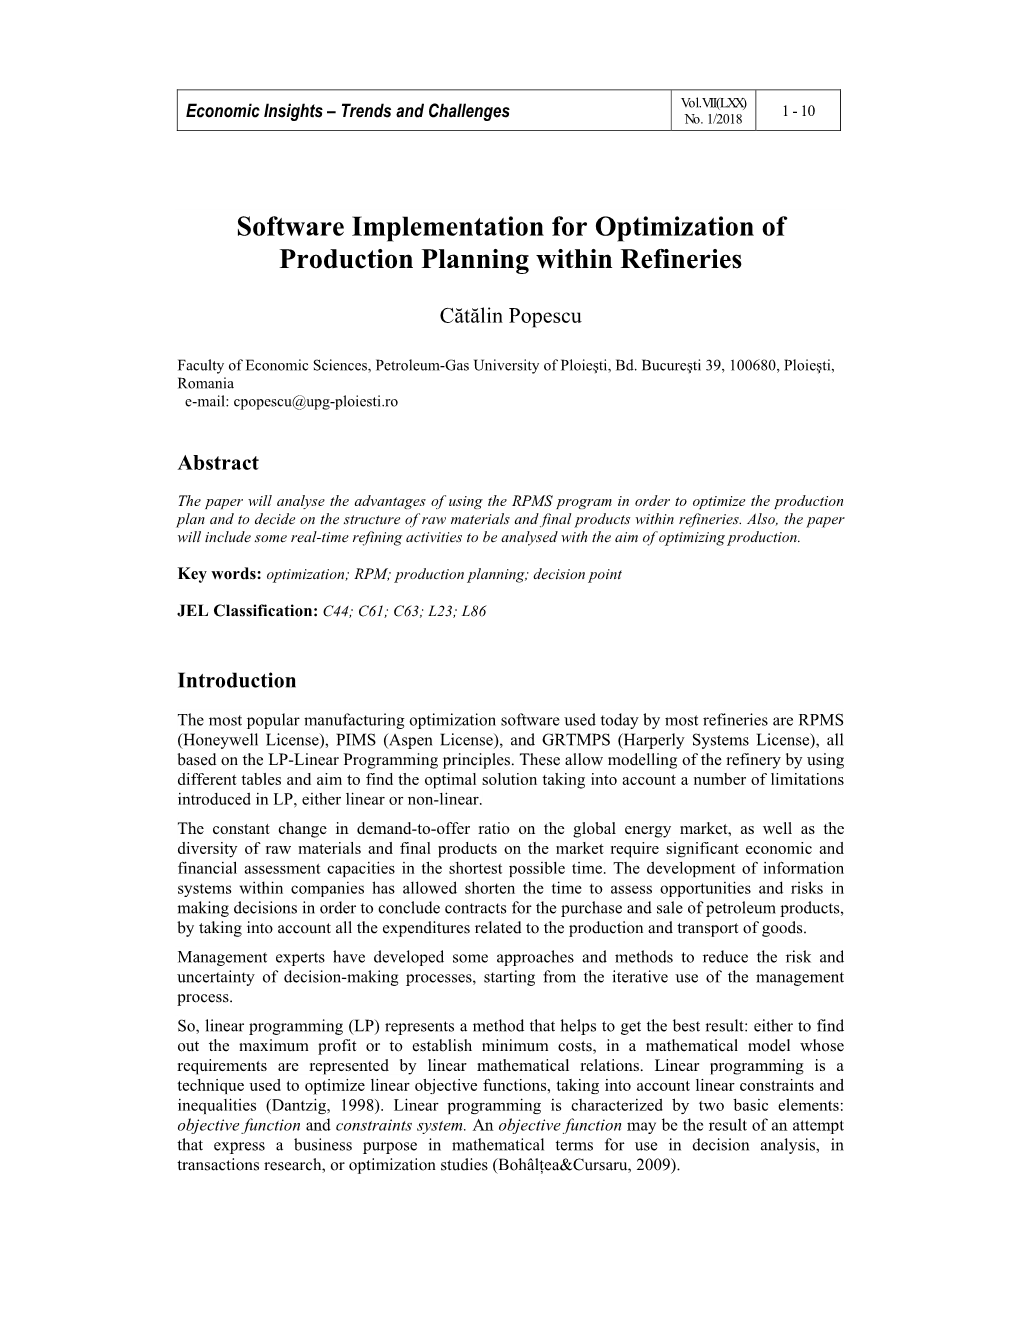 Software Implementation for Optimization of Production Planning Within Refineries